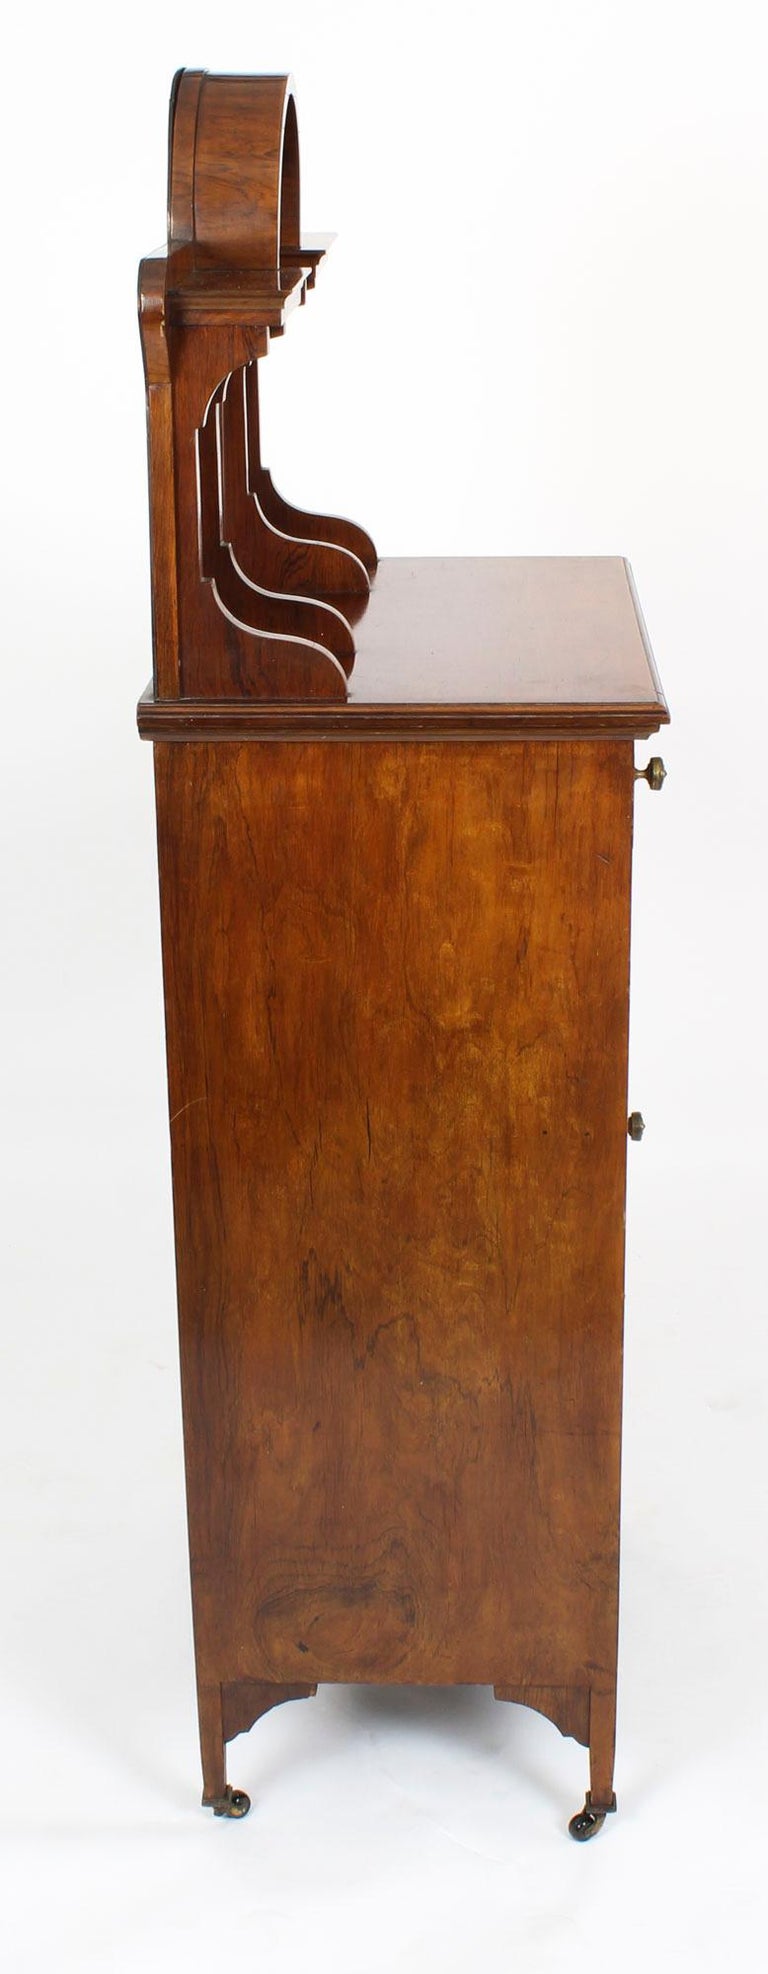 Antique Edwardian Gonçalo Alves Marquetry Inlaid Music Cabinet, 19th Century For Sale 9